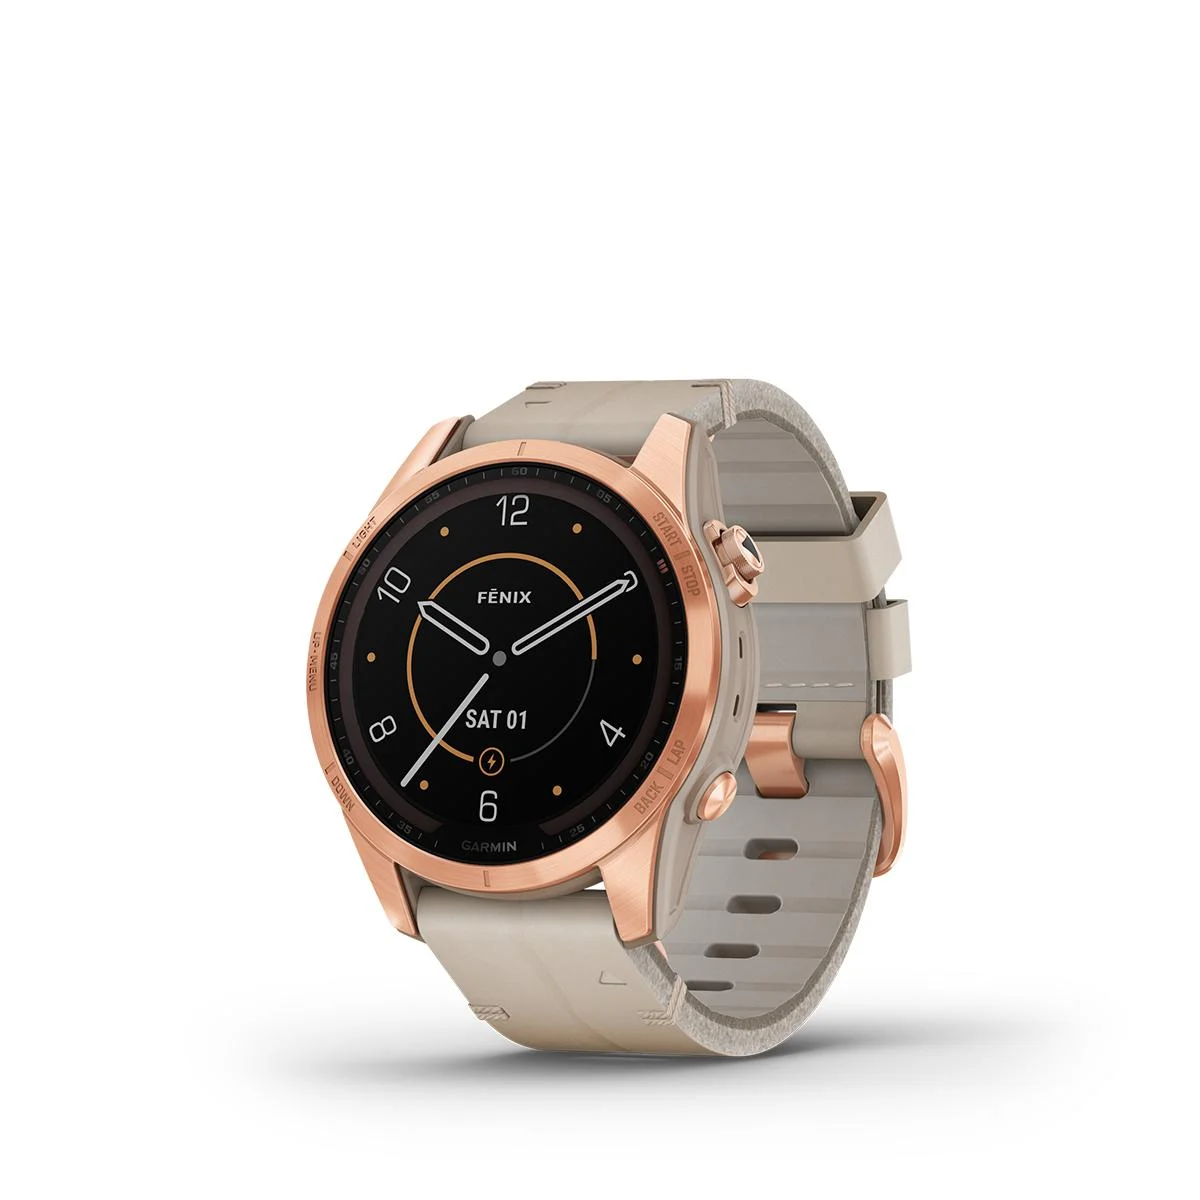 dong-ho-fenix-7s-sapphire-solar--rose-gold-titanium-with-limestone-leather-band